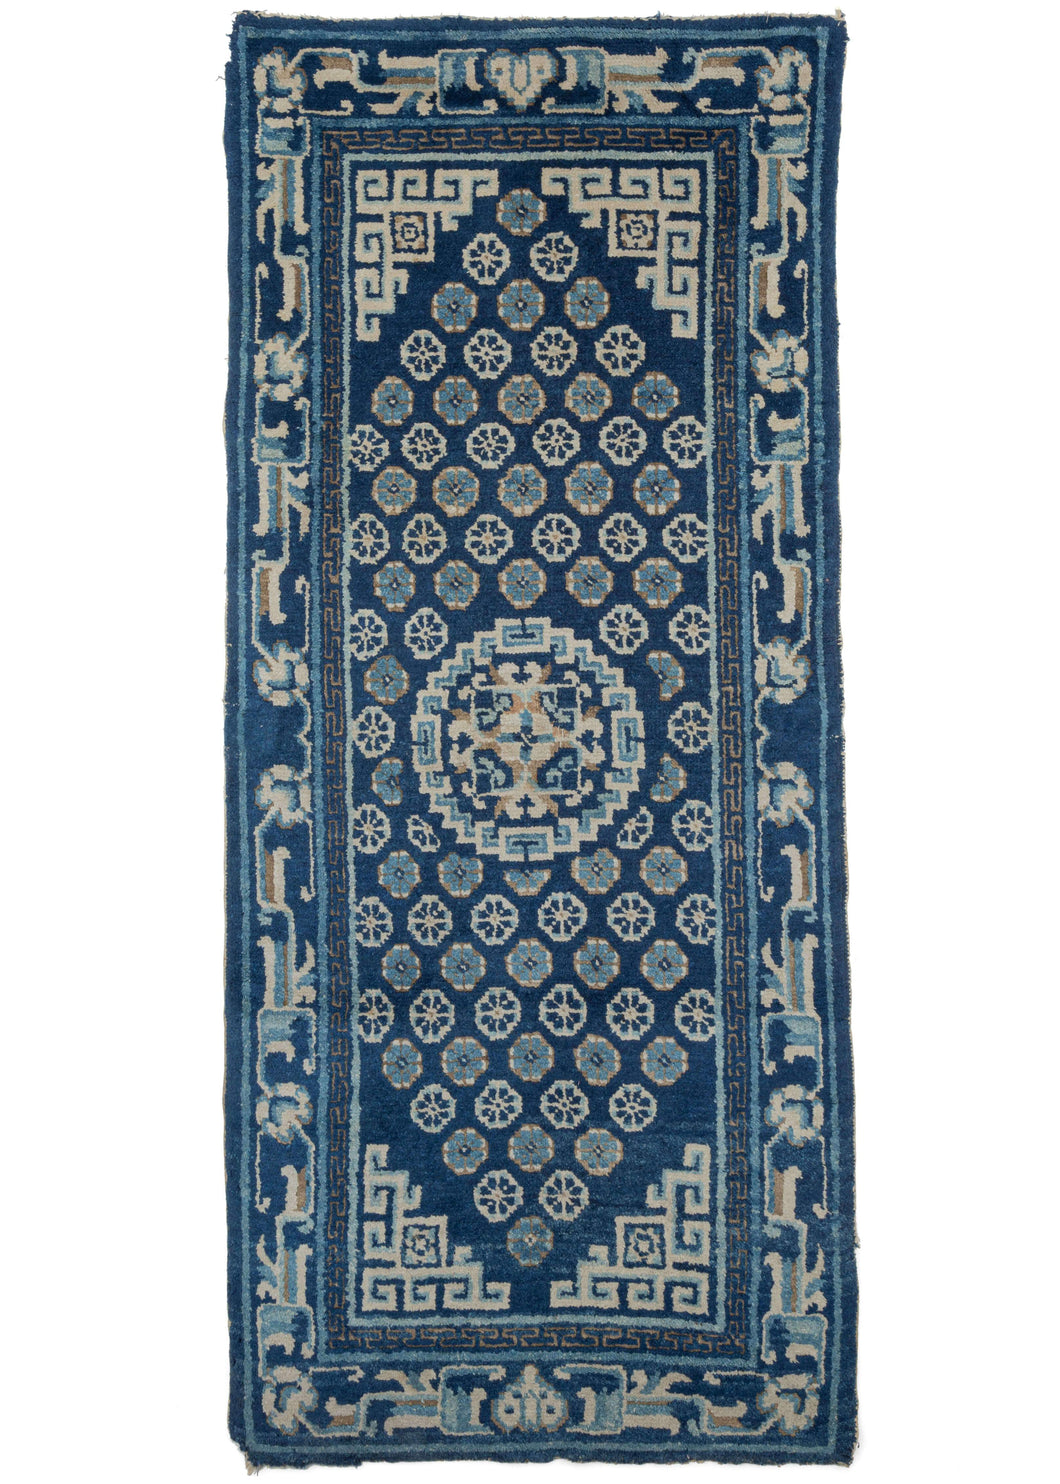 Antique Chinese Ningxia scatter rug a limited color palette in shades of blue and cream and a soft oxidized brown. The central mandala is framed by an alternating rosette pattern and scrolling cornices creating a diamond shaped field. The main border is a scrolling vine with two heart like shapes framed on the top and bottom with a minor border composed of a greek key motif.